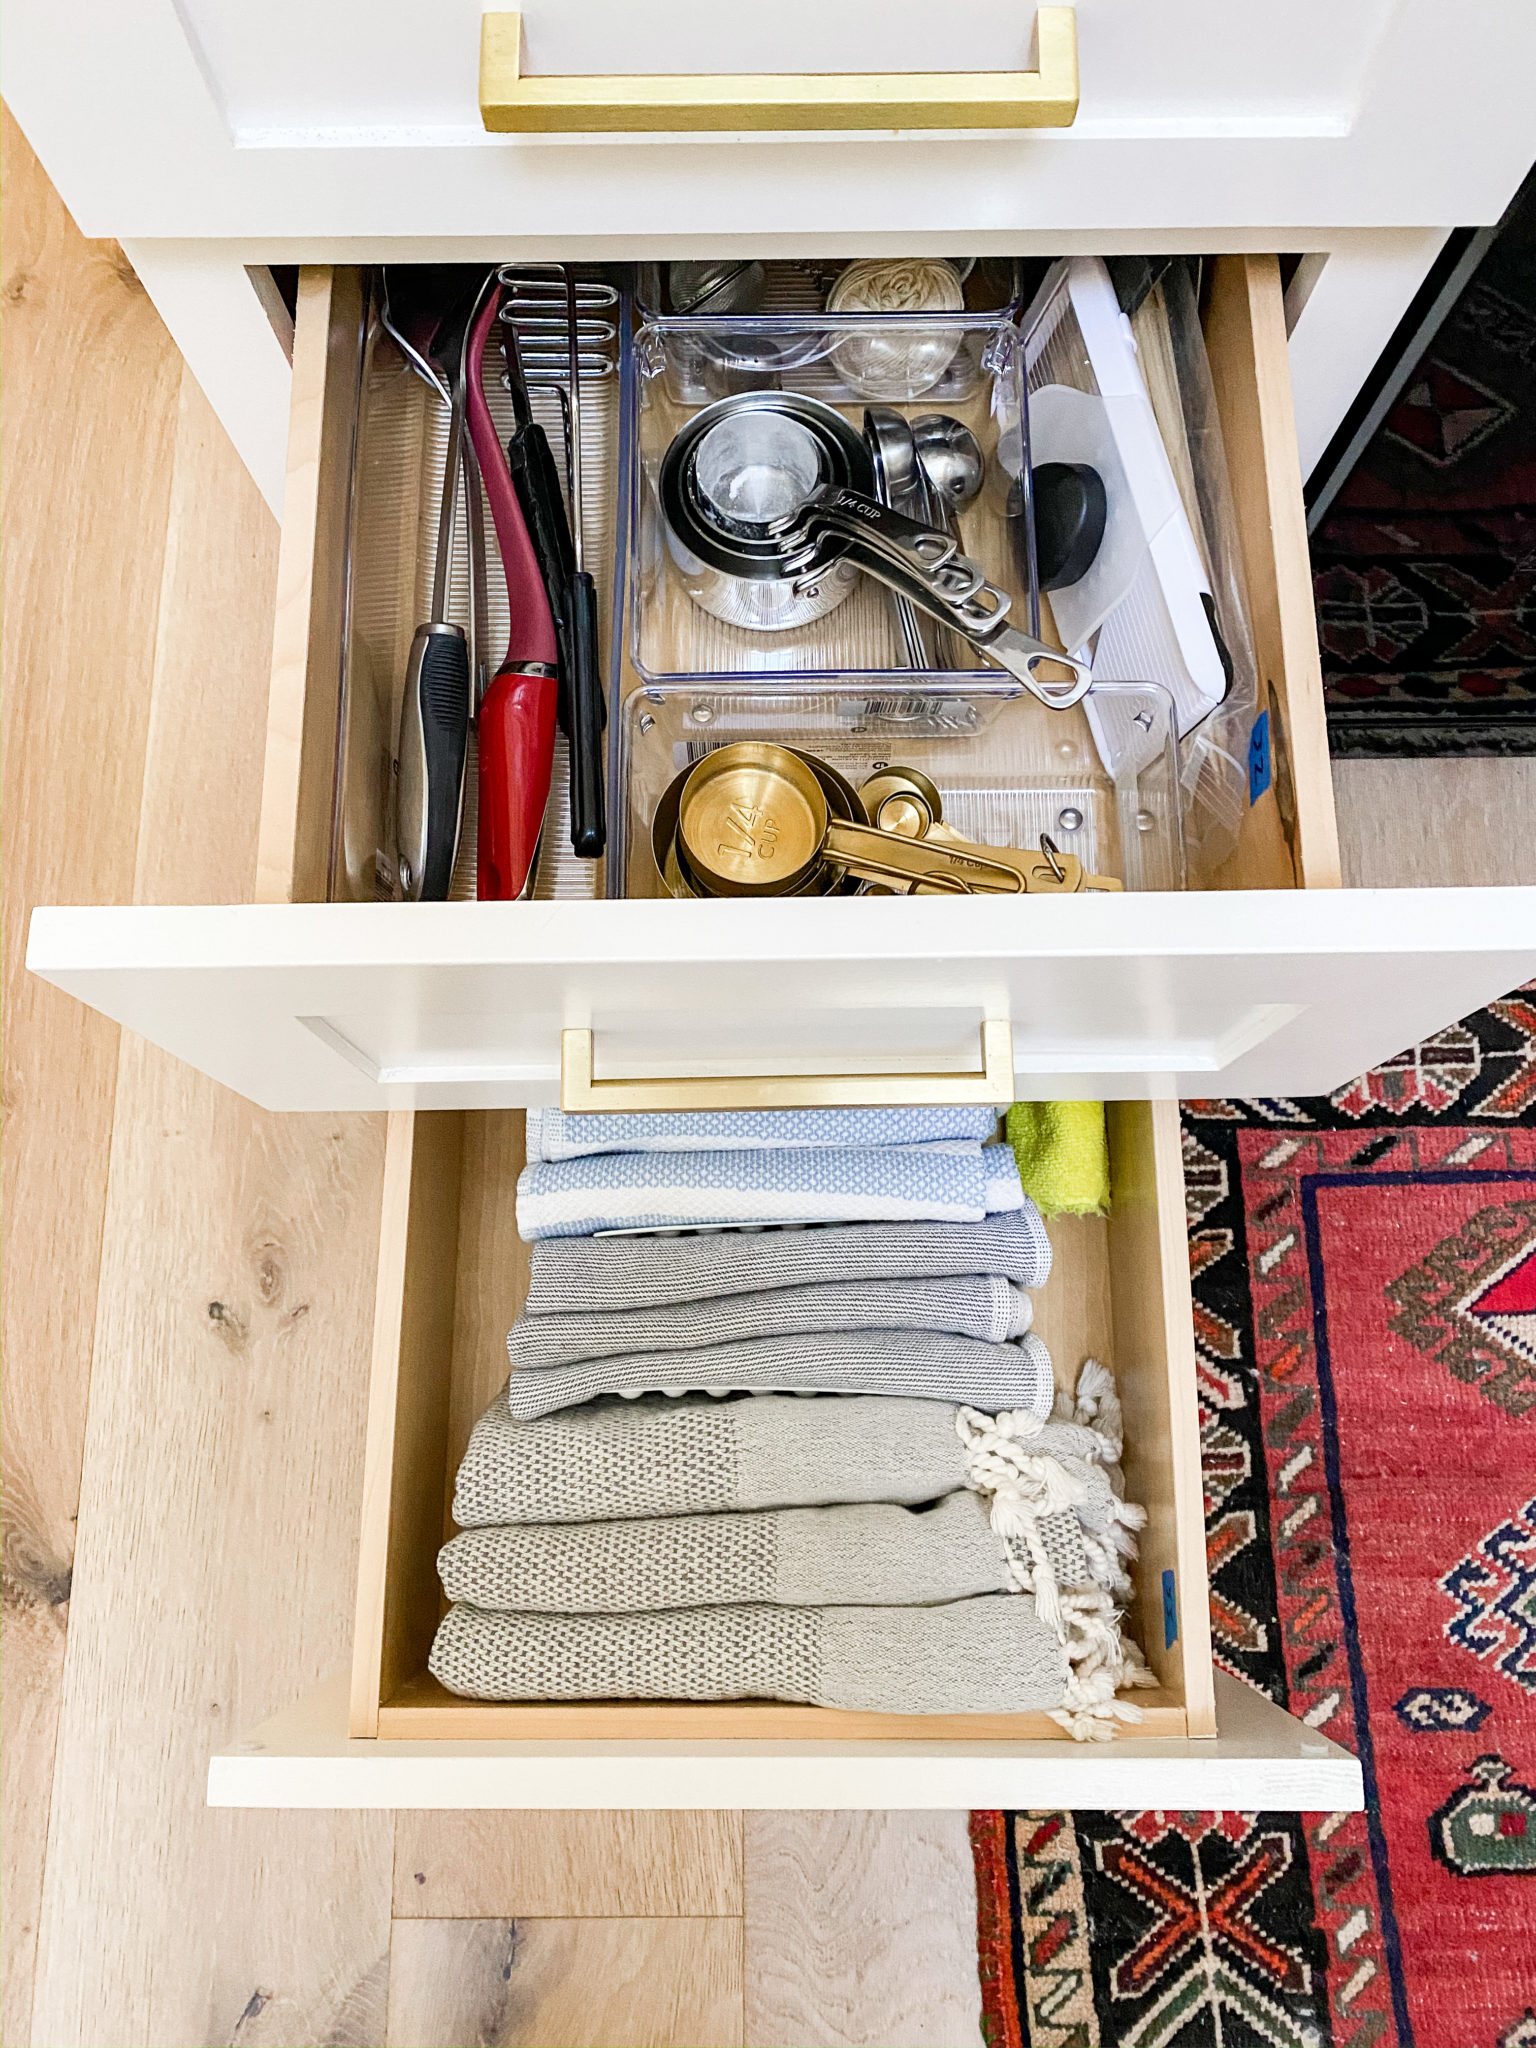 5 Types Of Kitchen Drawer Organizers & How To Use Them - Organized-ish